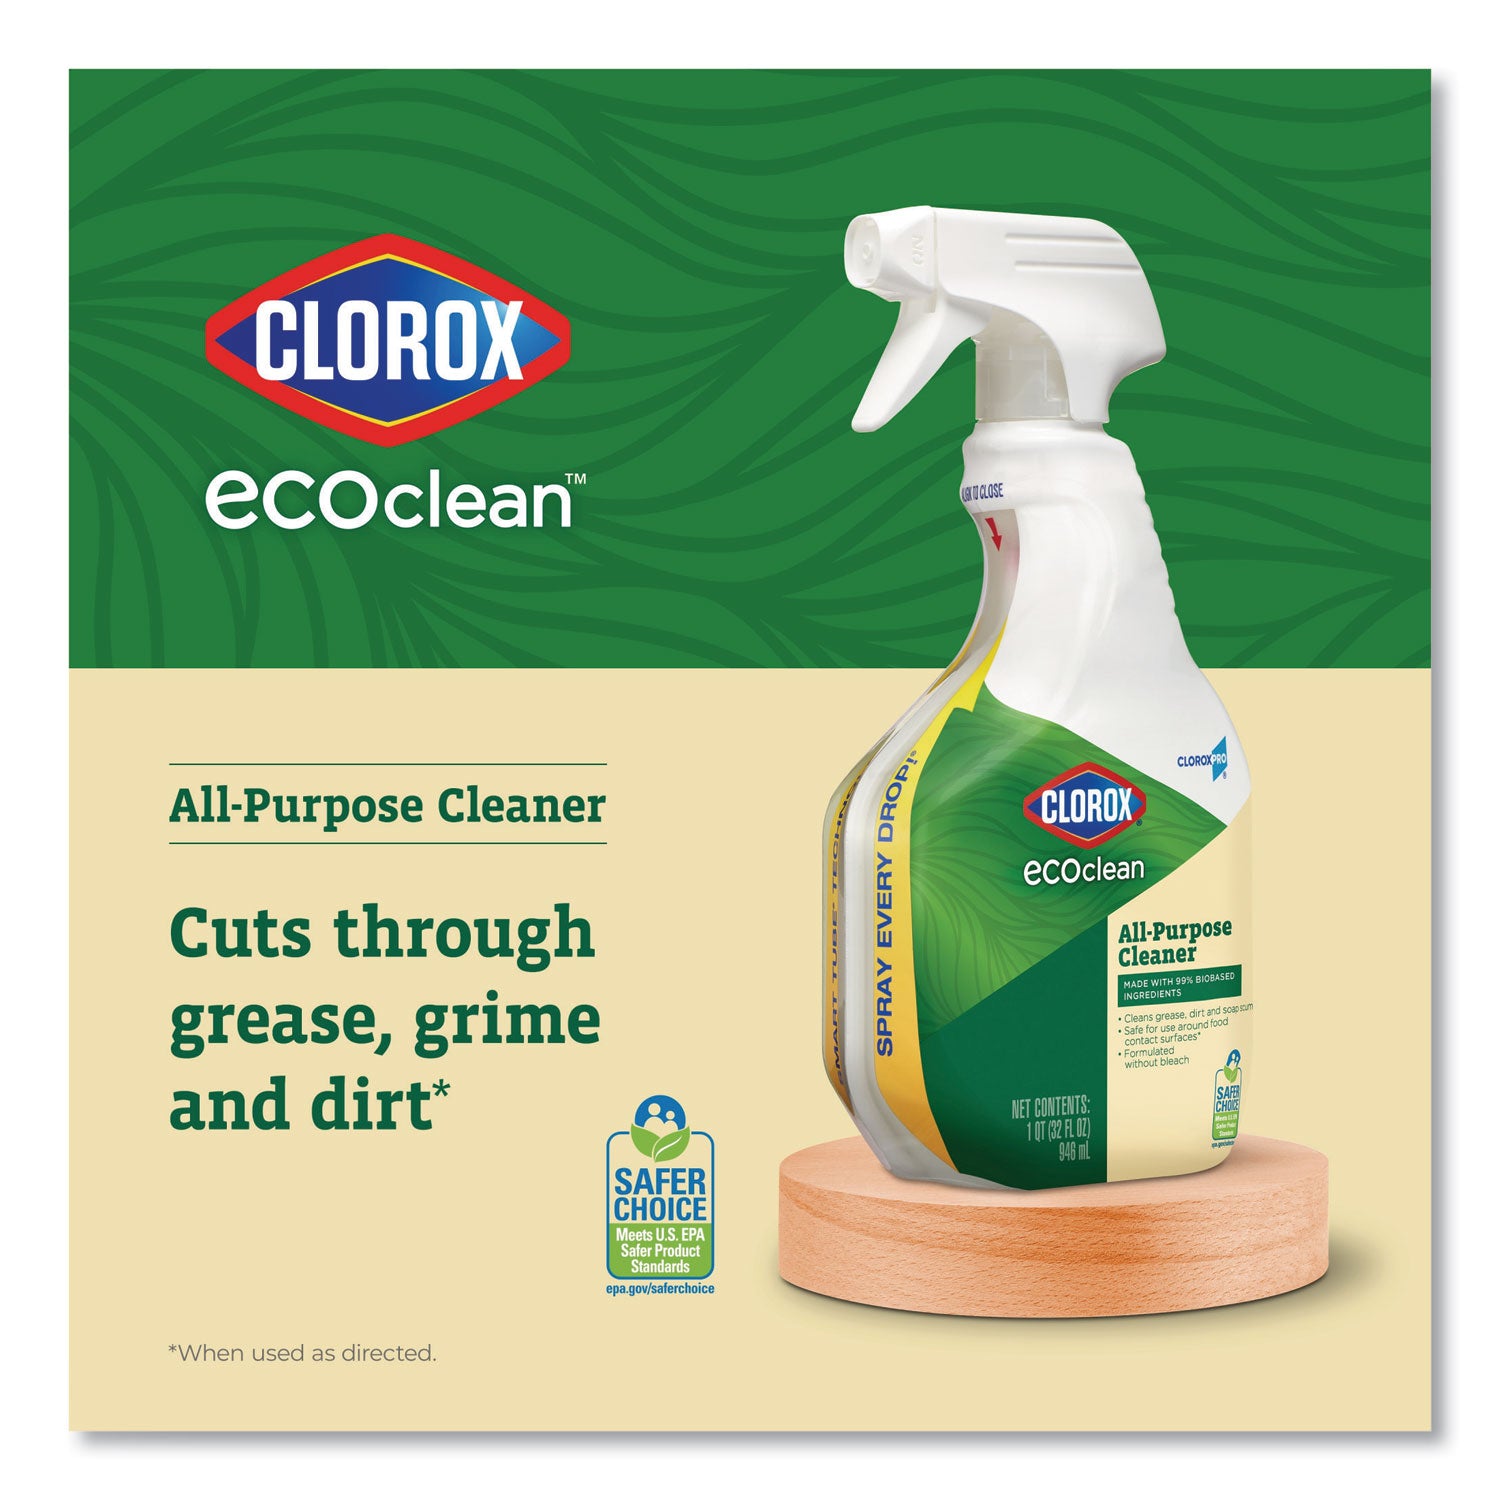 clorox-pro-ecoclean-all-purpose-cleaner-unscented-128-oz-bottle-4-carton_clo60278ct - 6